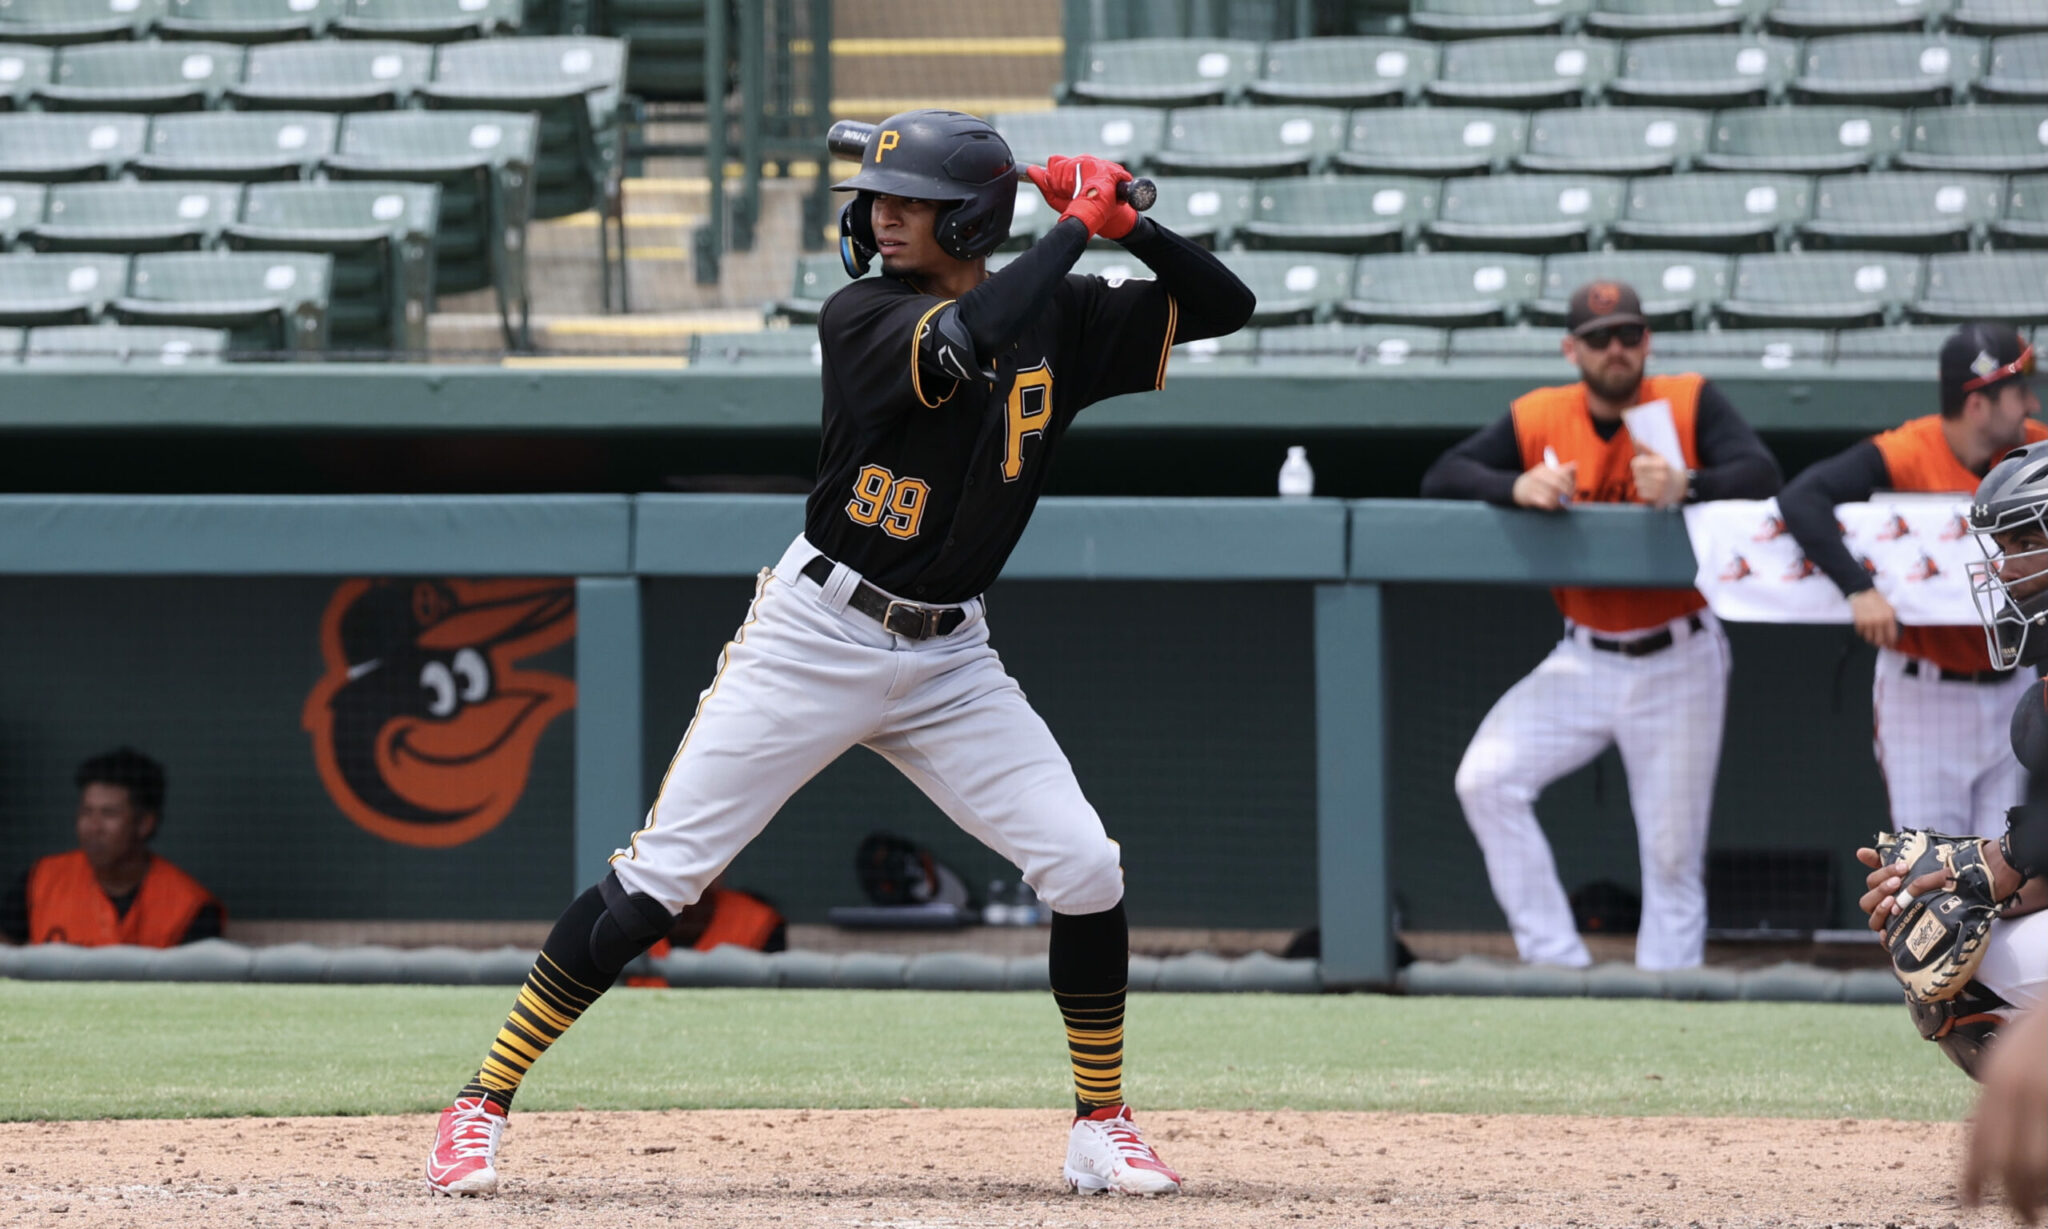 Pirates Winter Report: Jesus Castillo is Getting Great Experience at a Young Age